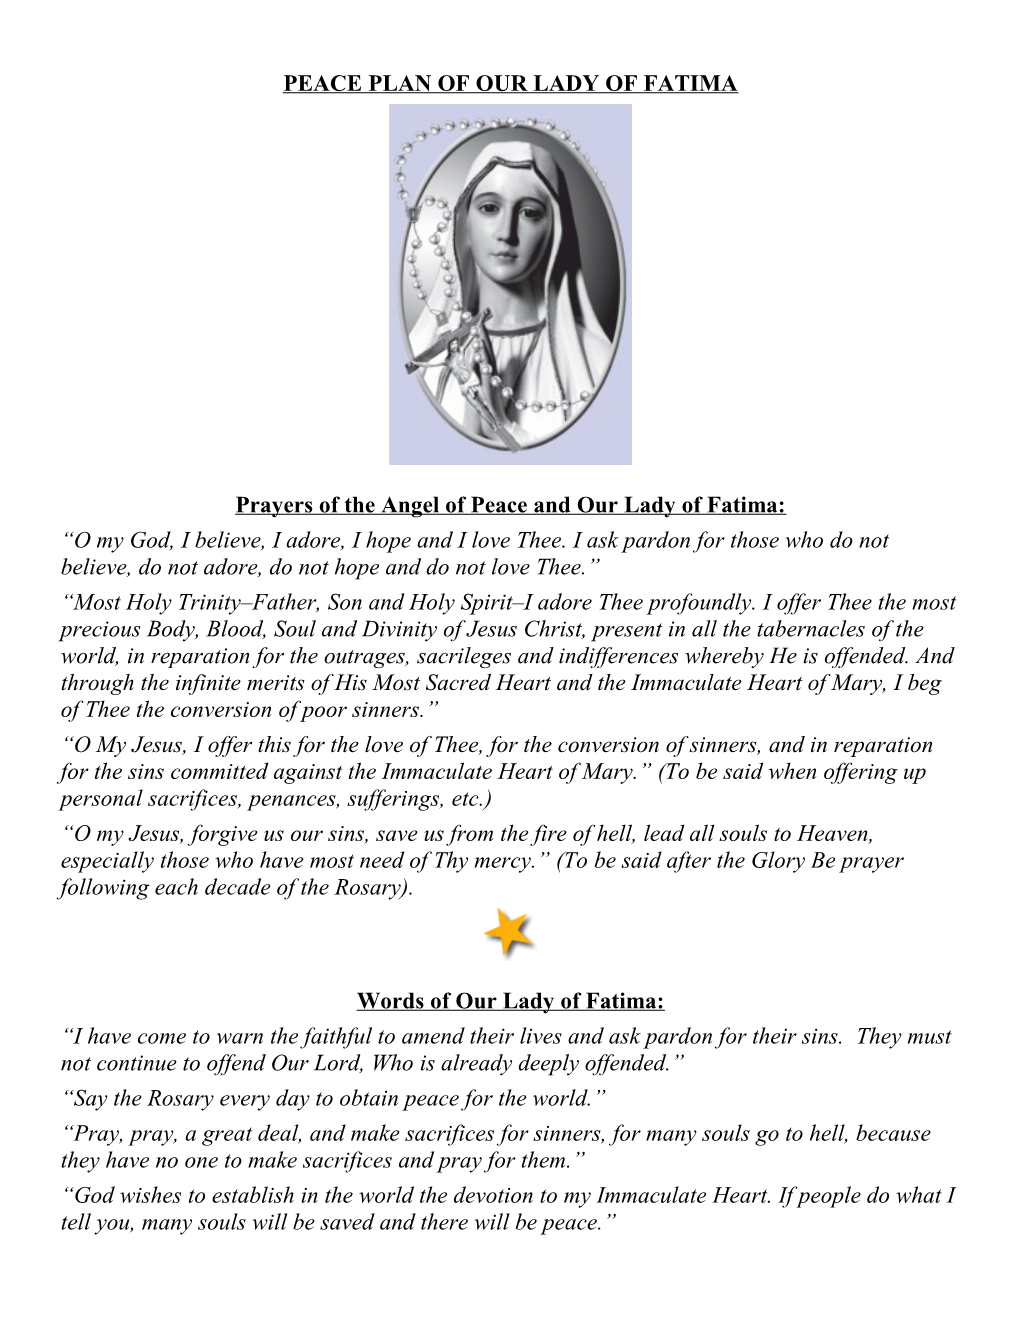 Prayers of the Angel of Peace and Our Lady of Fatima